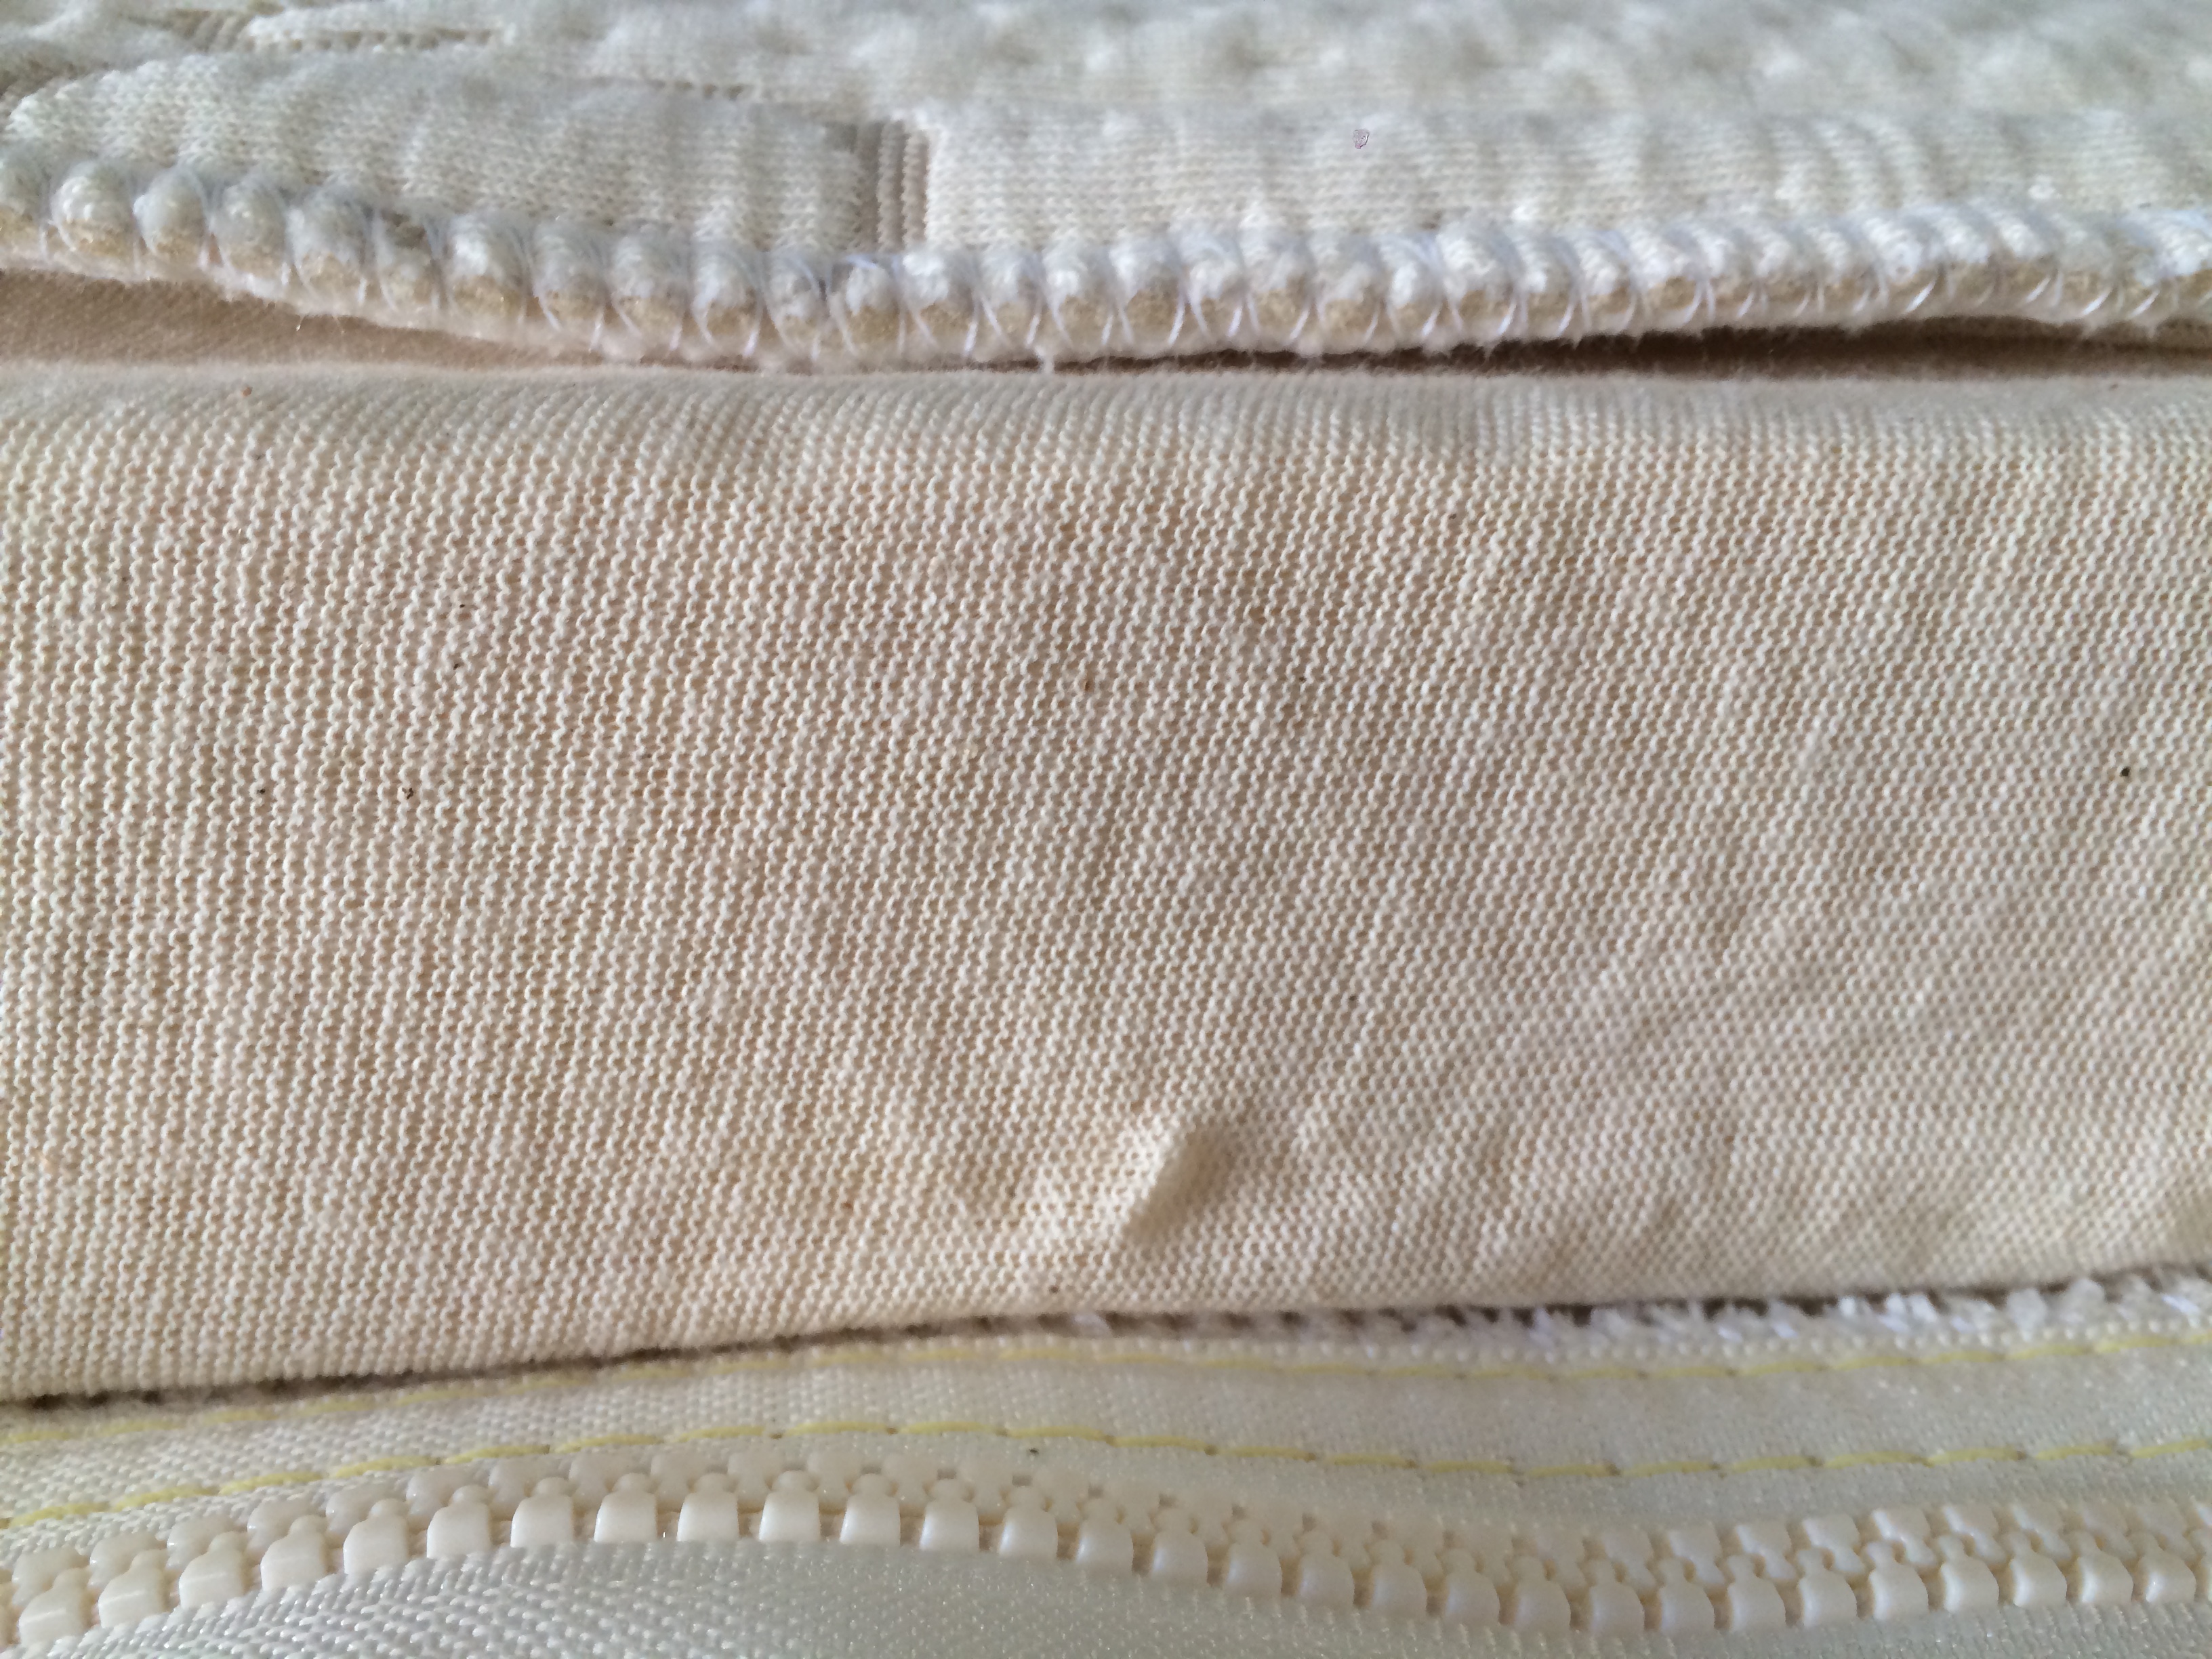 we cover each piece latex bedding piece in a certified organic cotton knit sock